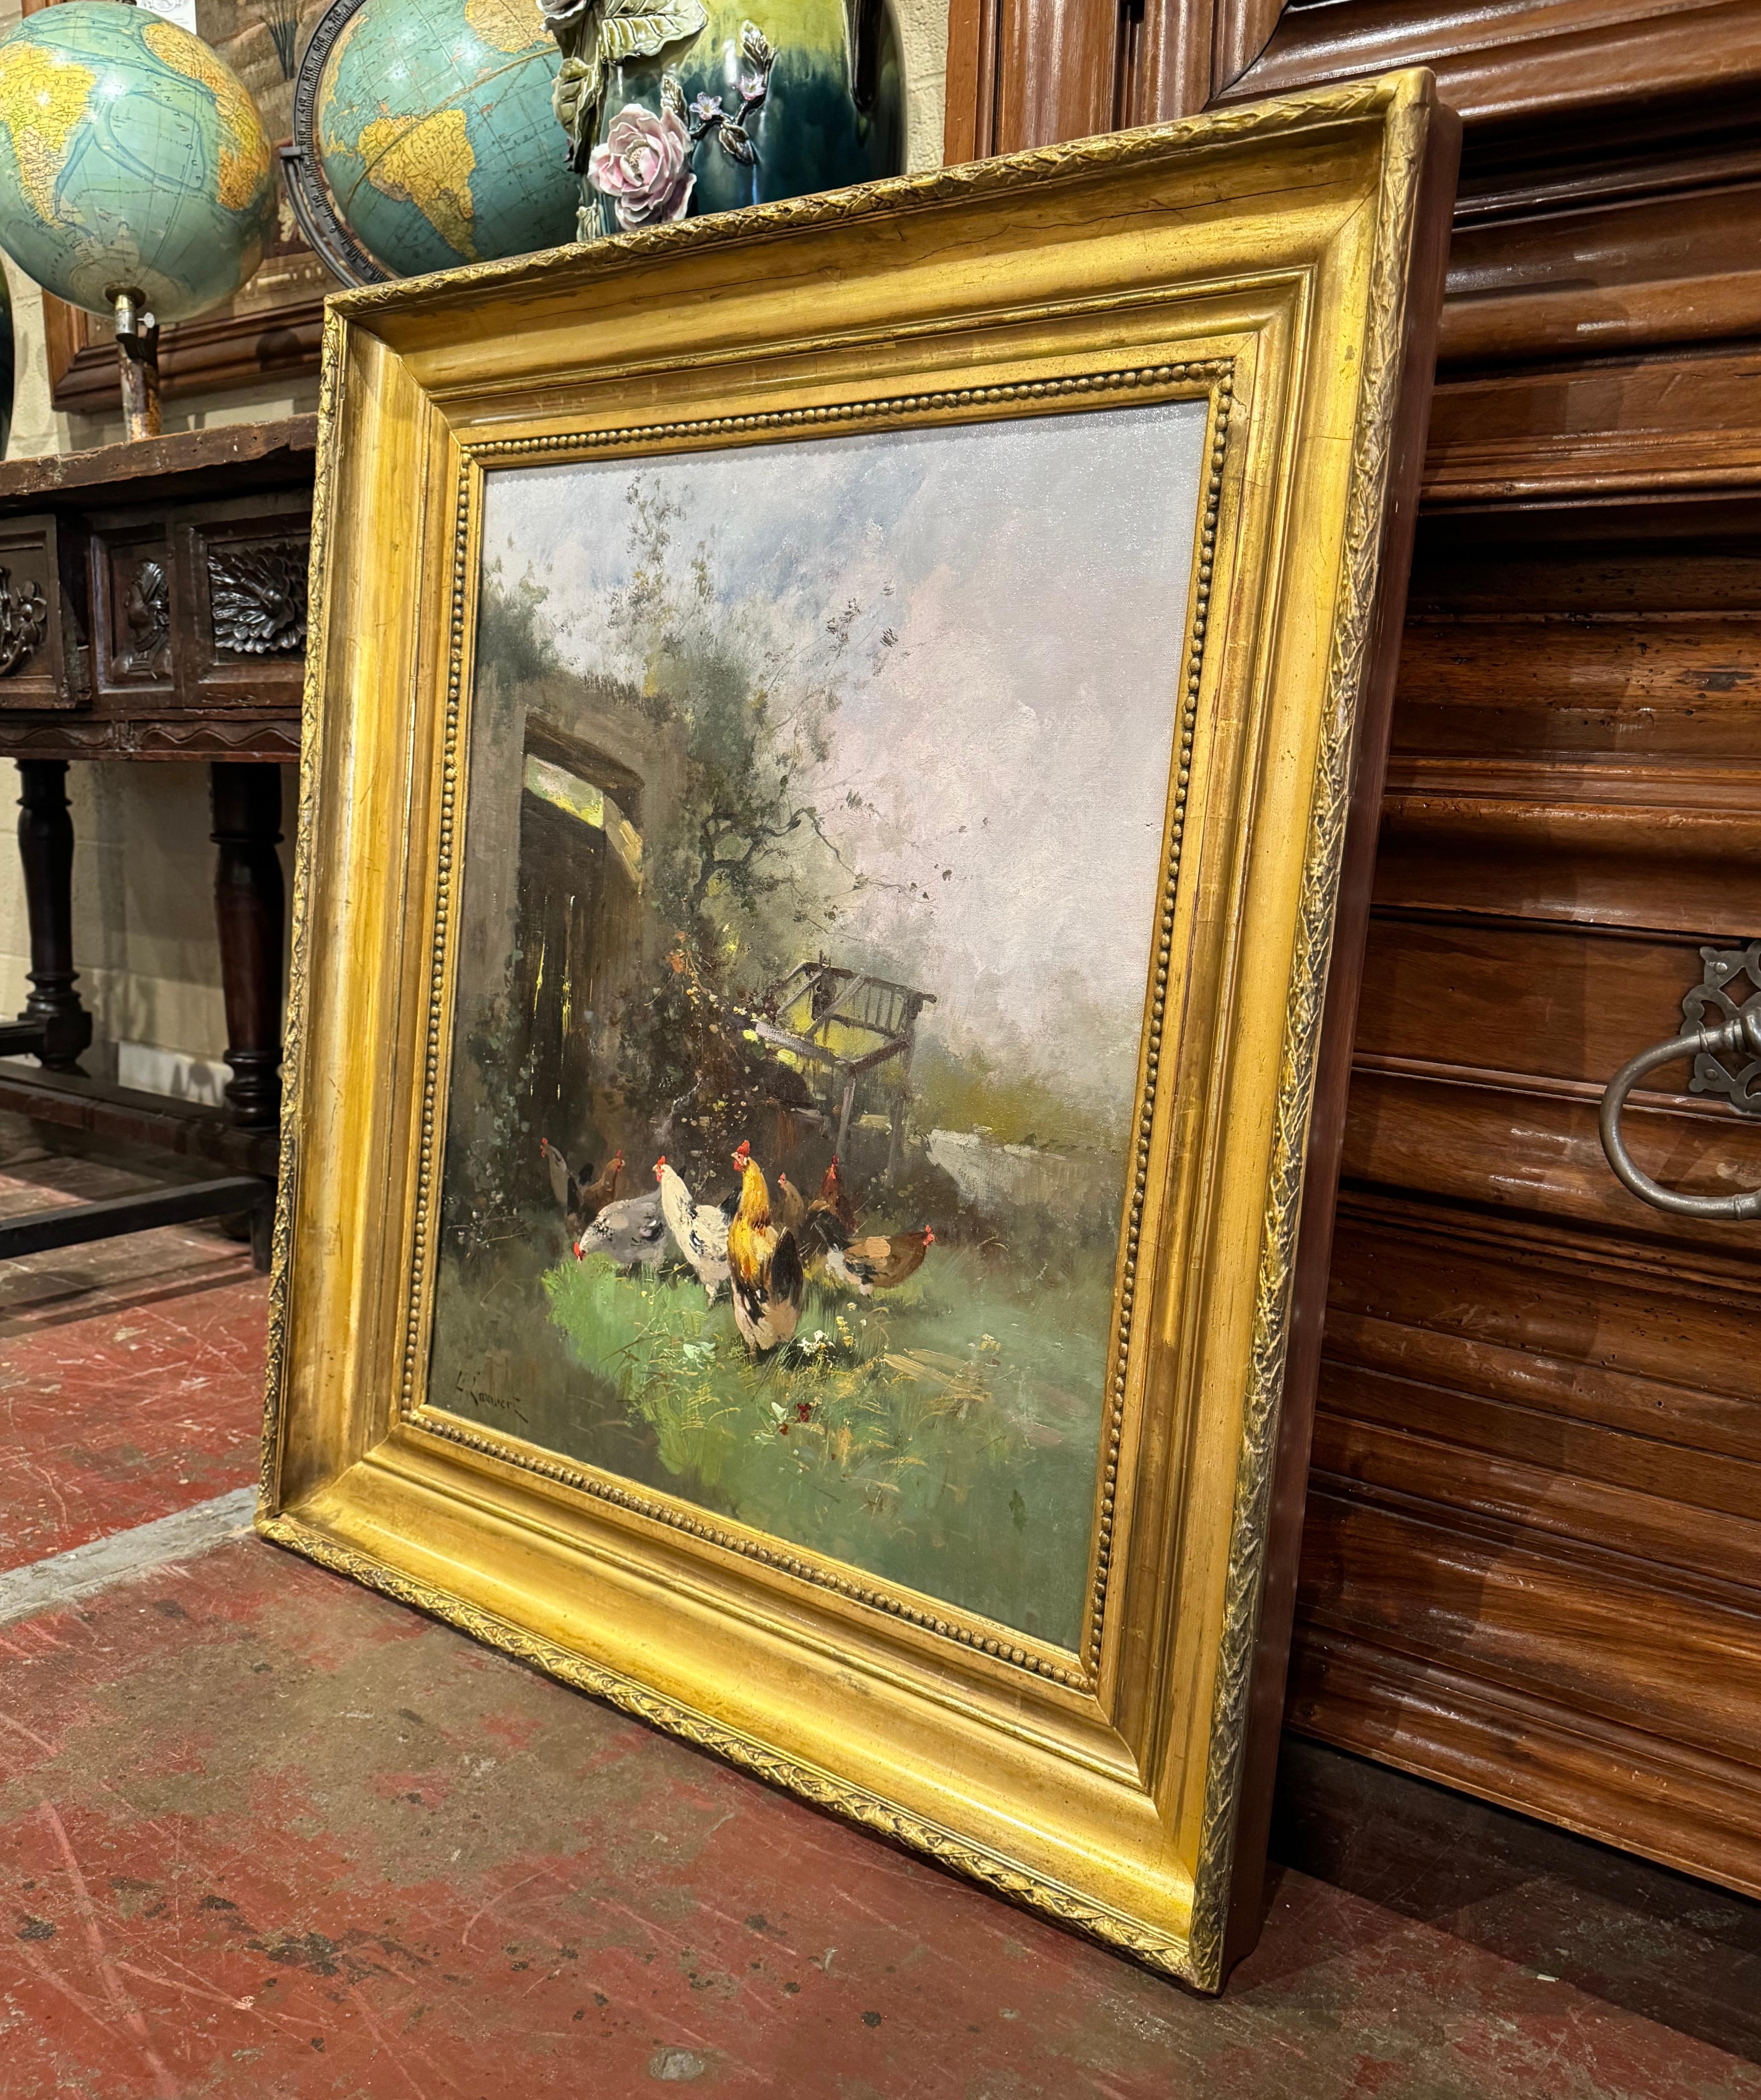 Decorate a study, office or den with this beautiful and colorful antique oil on canvas painting! Painted in France circa 1890, the artwork is set in a 19th century carved gilt wood frame and illustrates a picturesque typical 